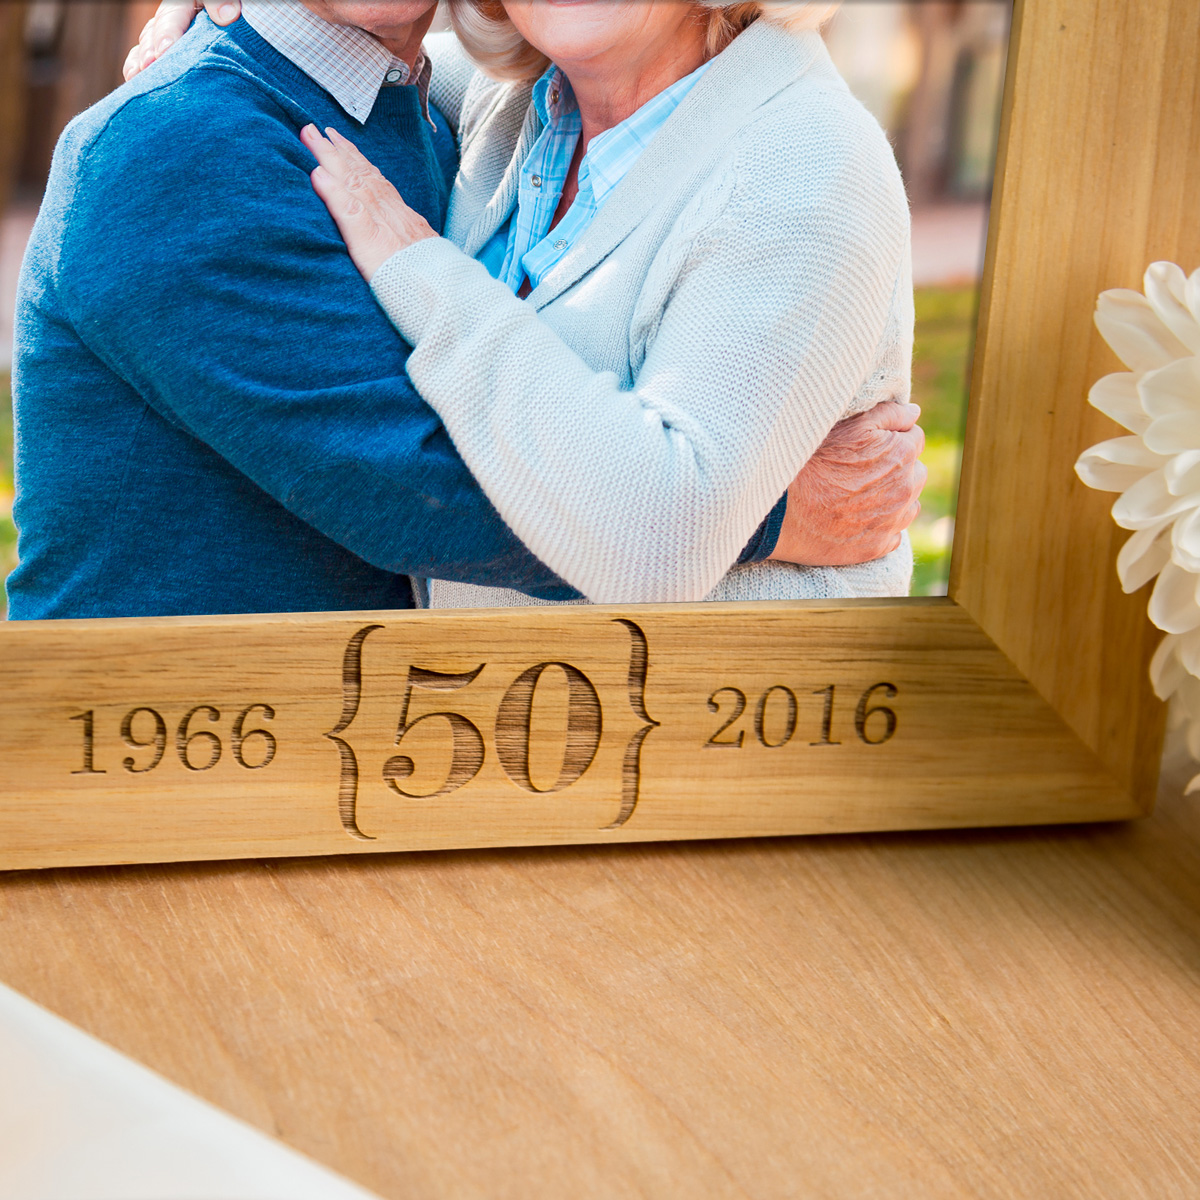 Personalised Wooden Photo Frame - 50th Anniversary